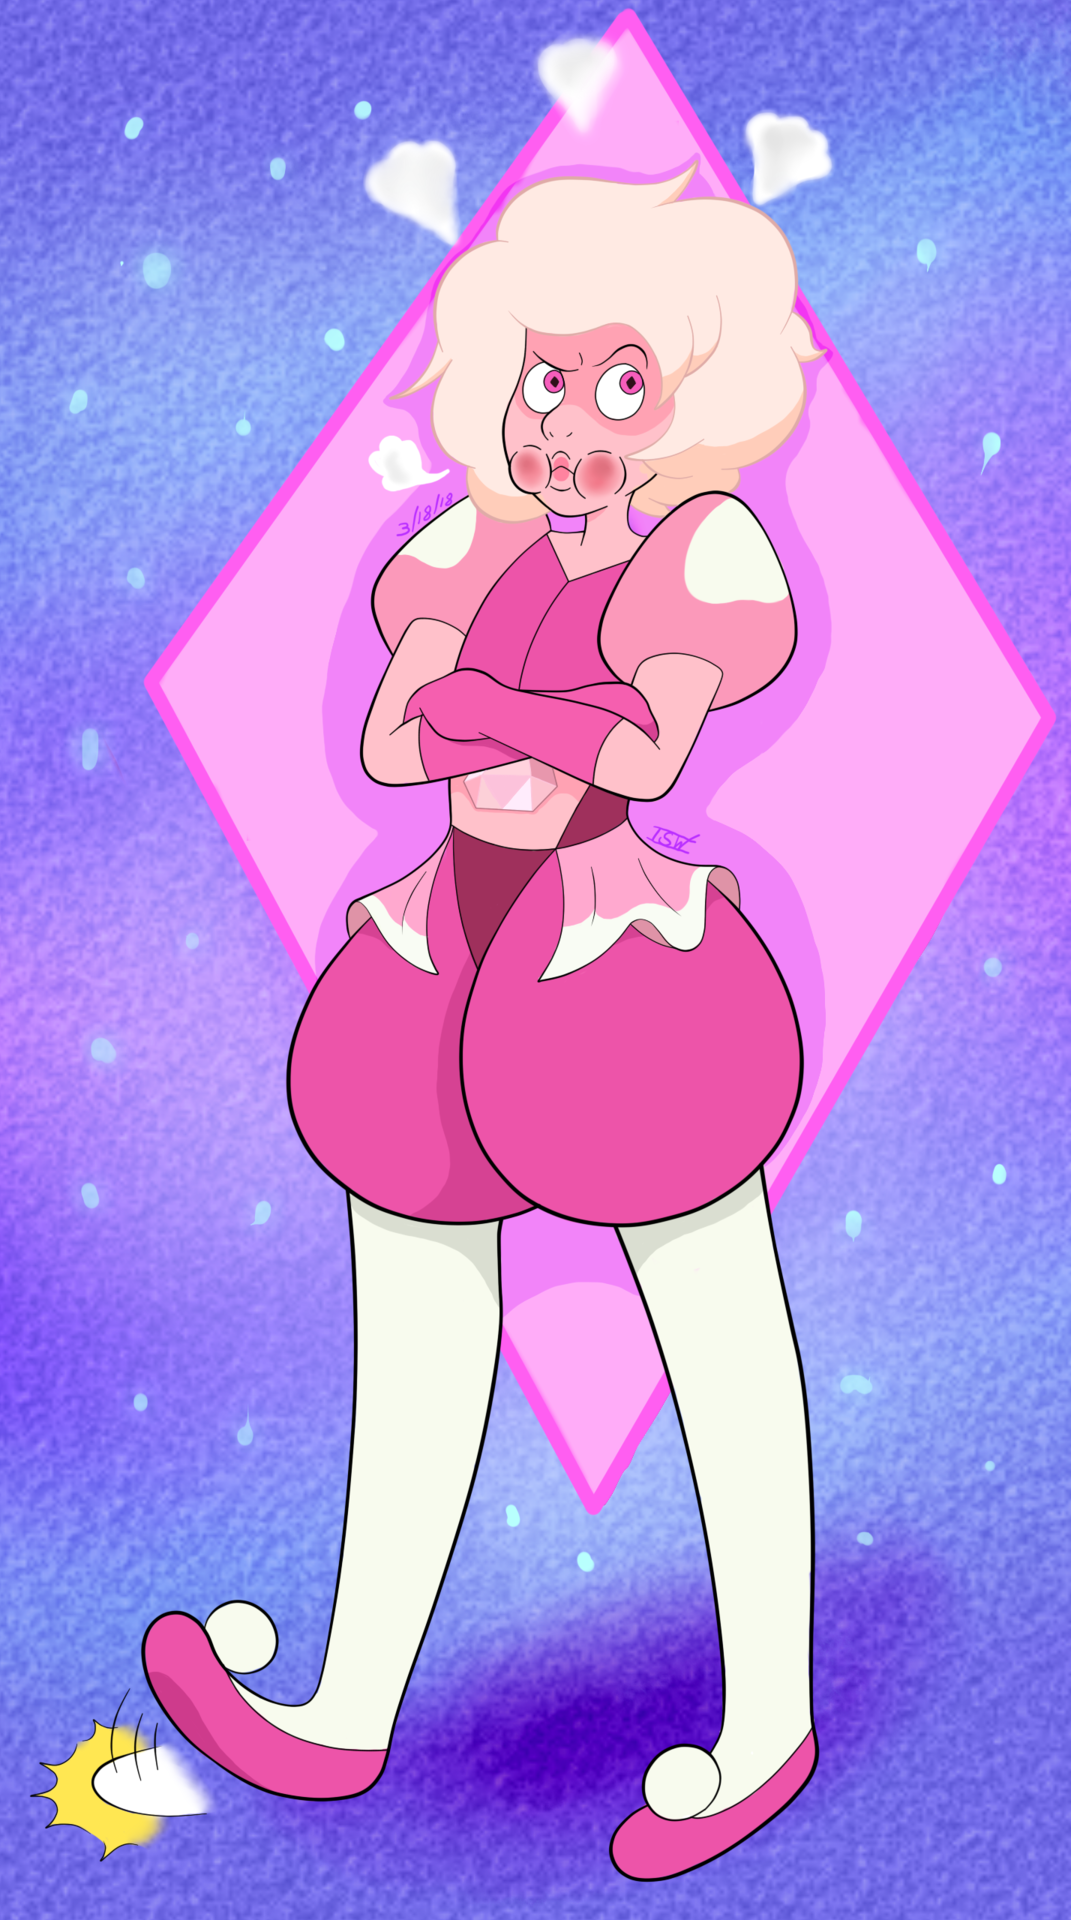 It’s the Pouty Princess Pink Diamond herself. And I can’t wait to learn more about her.